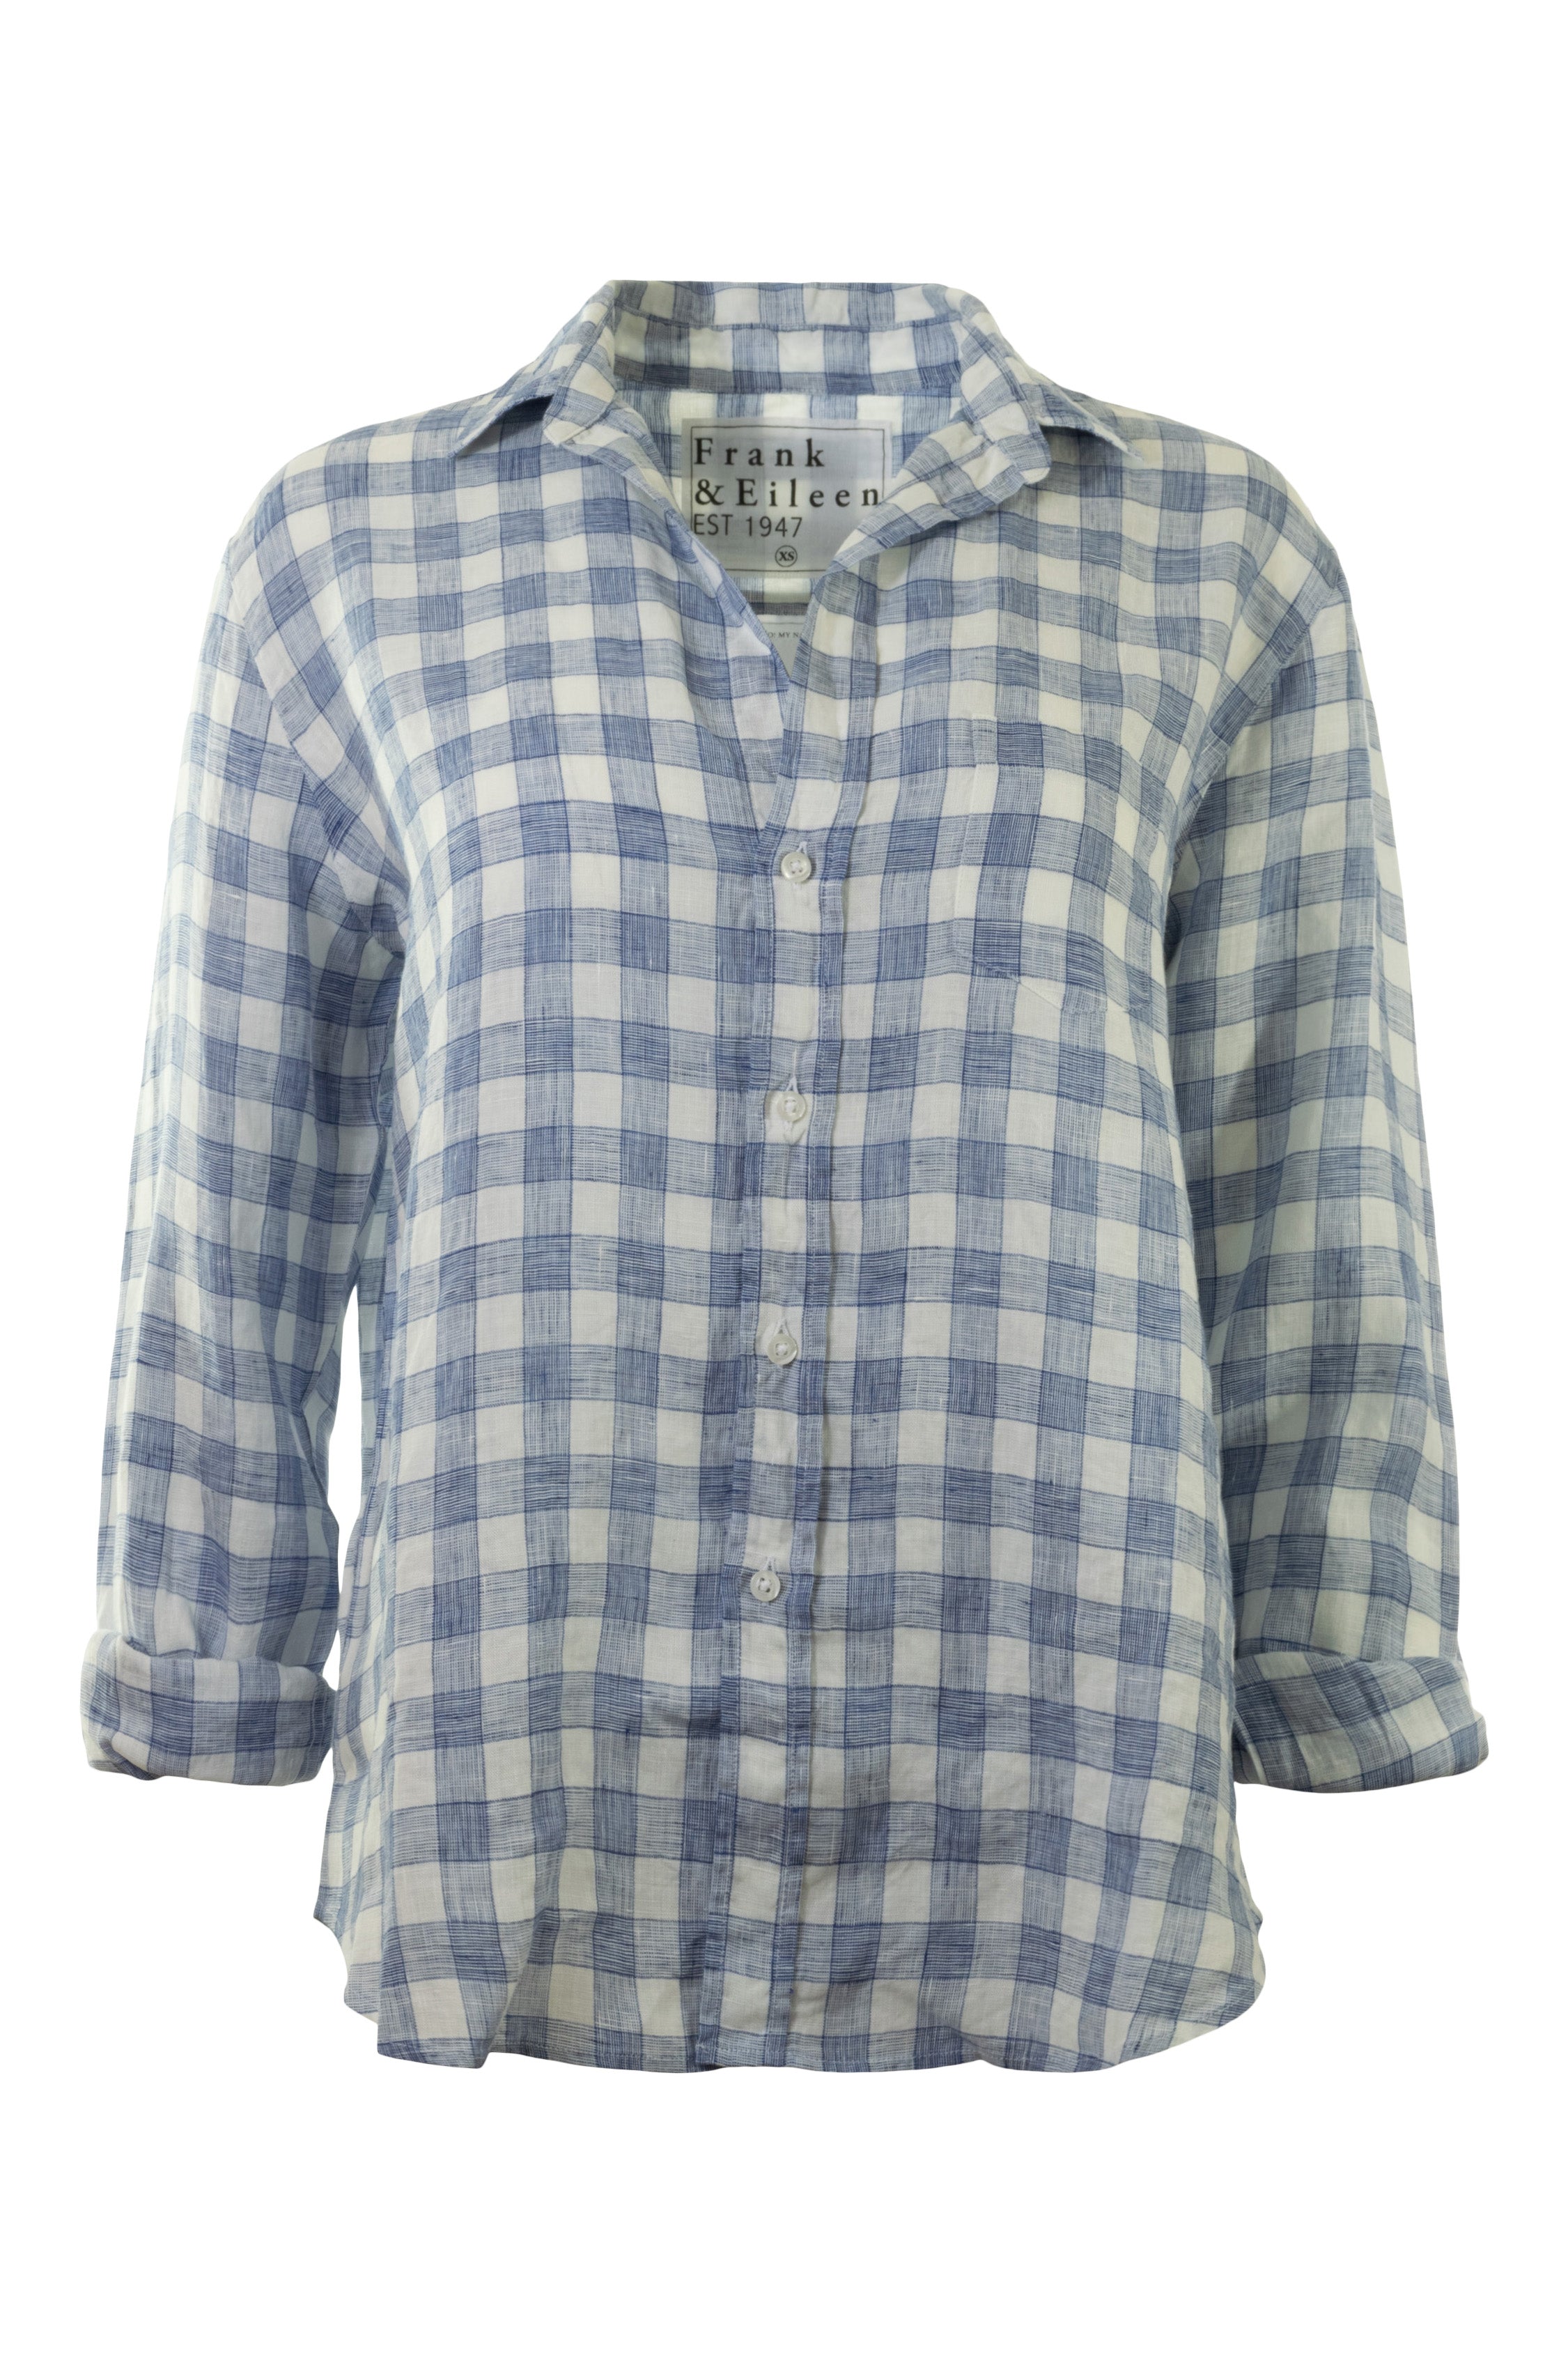 Frank & Eileen Eileen Relaxed Button Up Shirt in White, Blue Textured Check